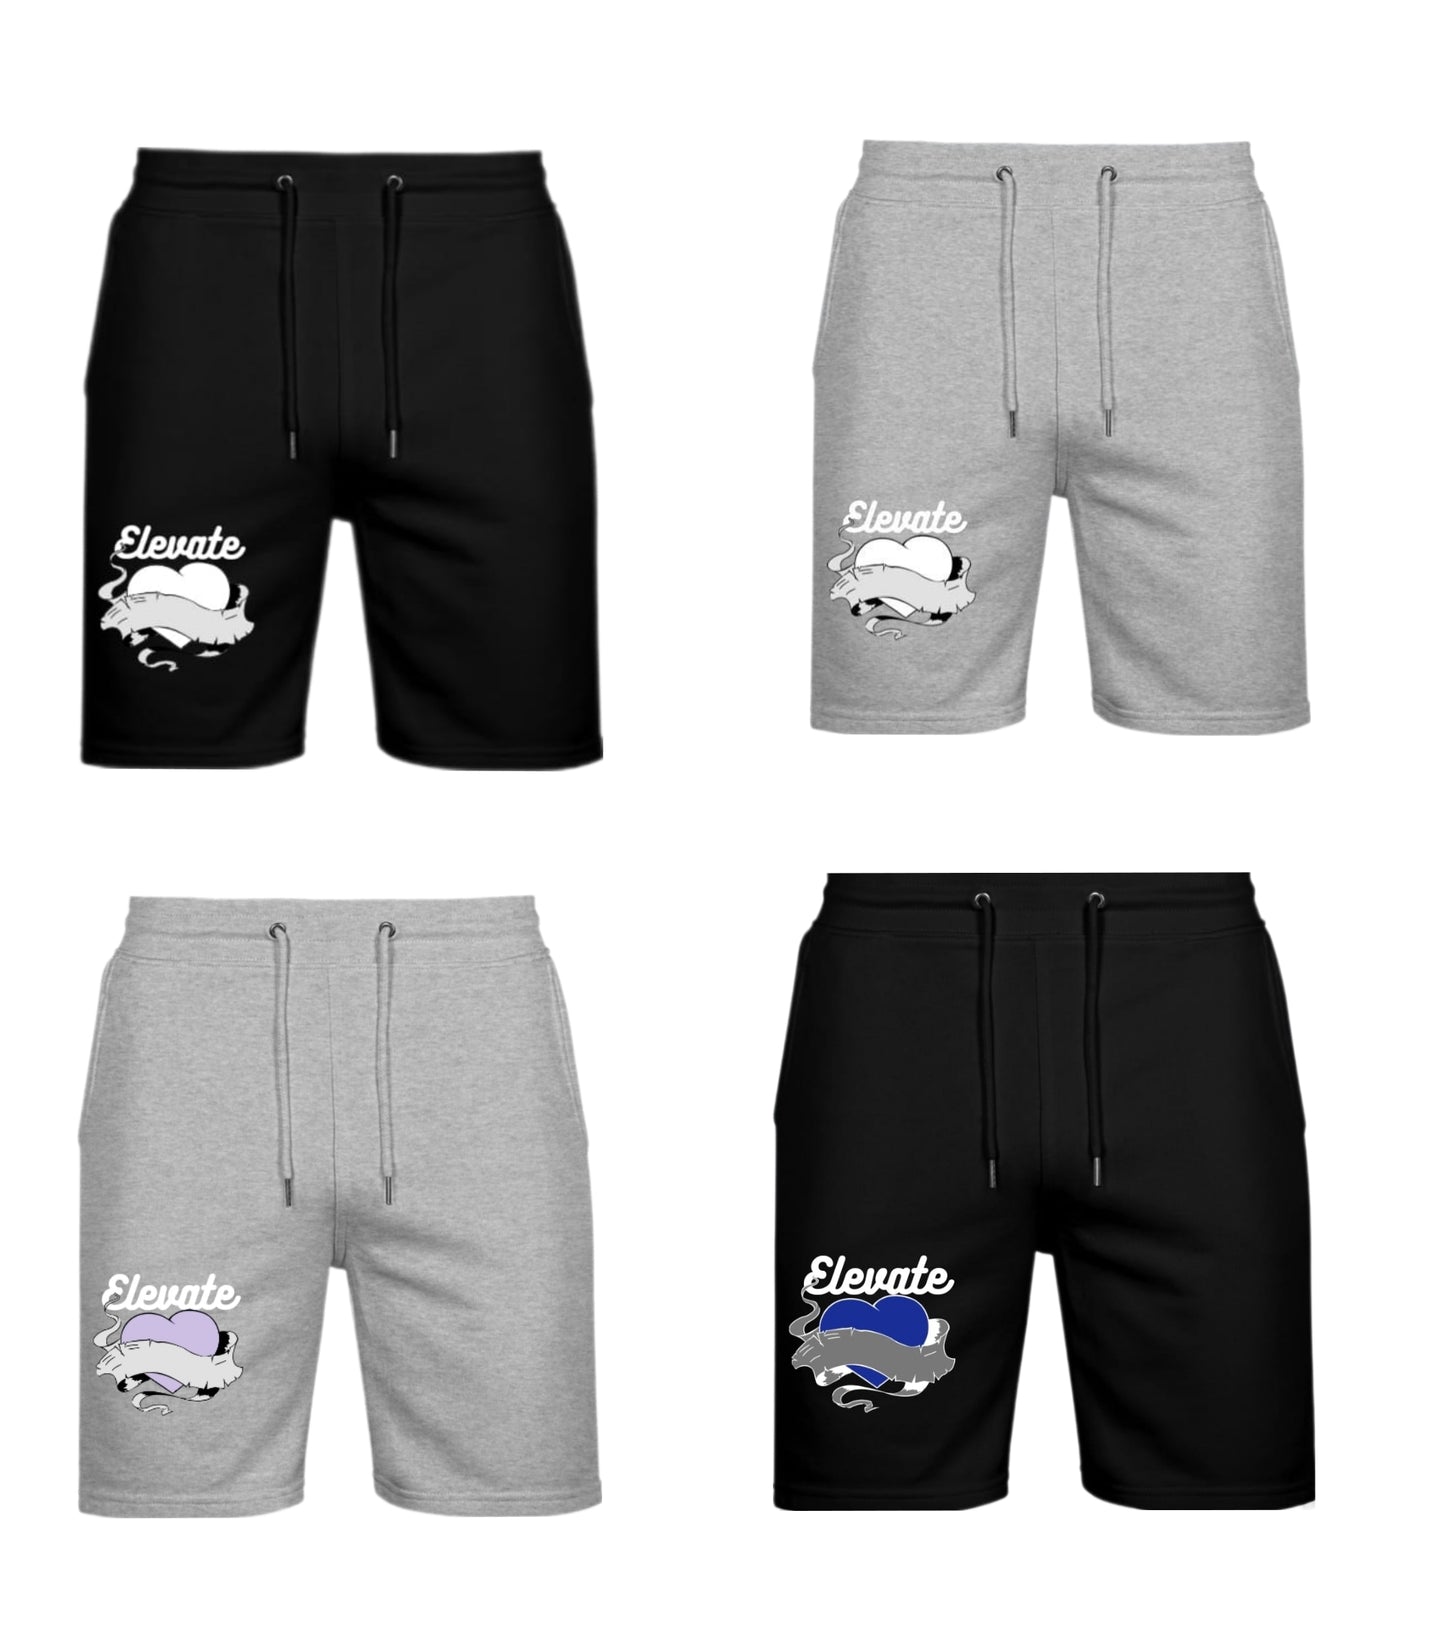 Elevate heart shorts(pre-order)